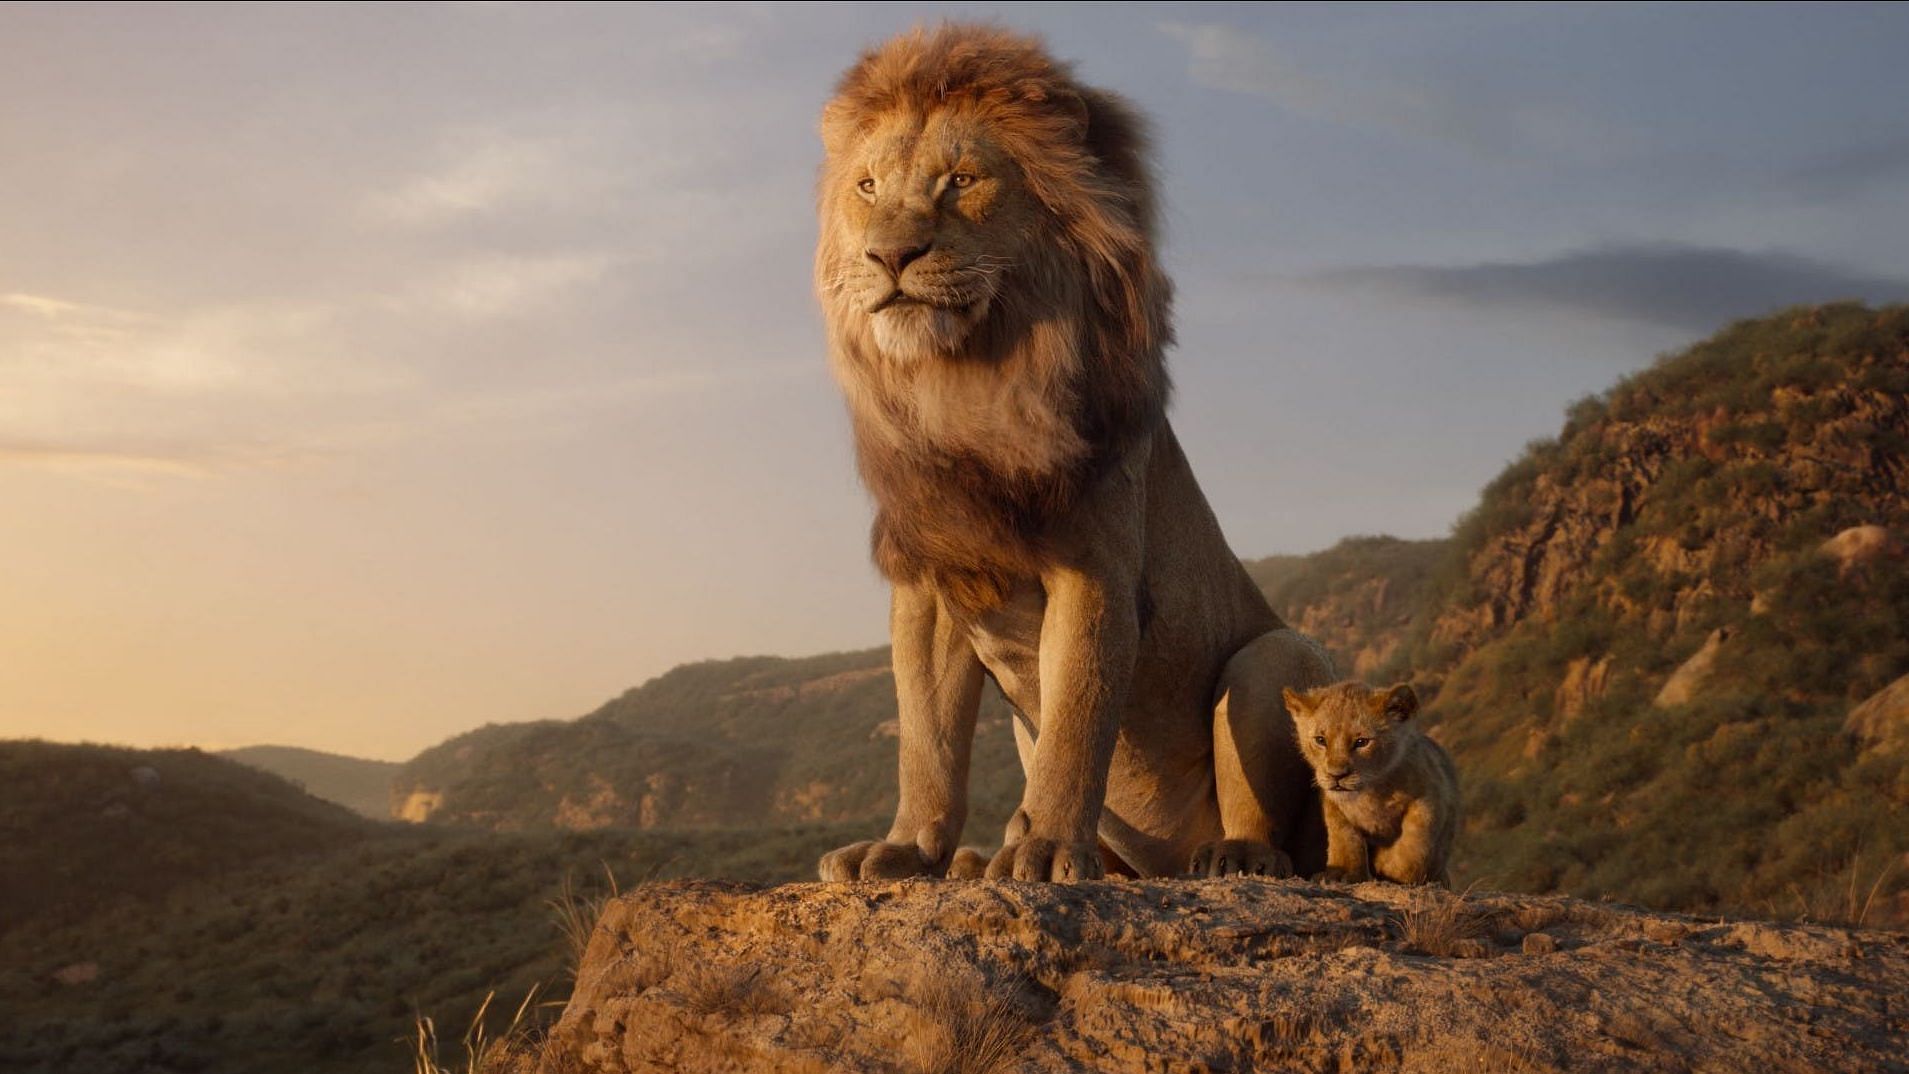 A still from <i>The Lion King</i>.